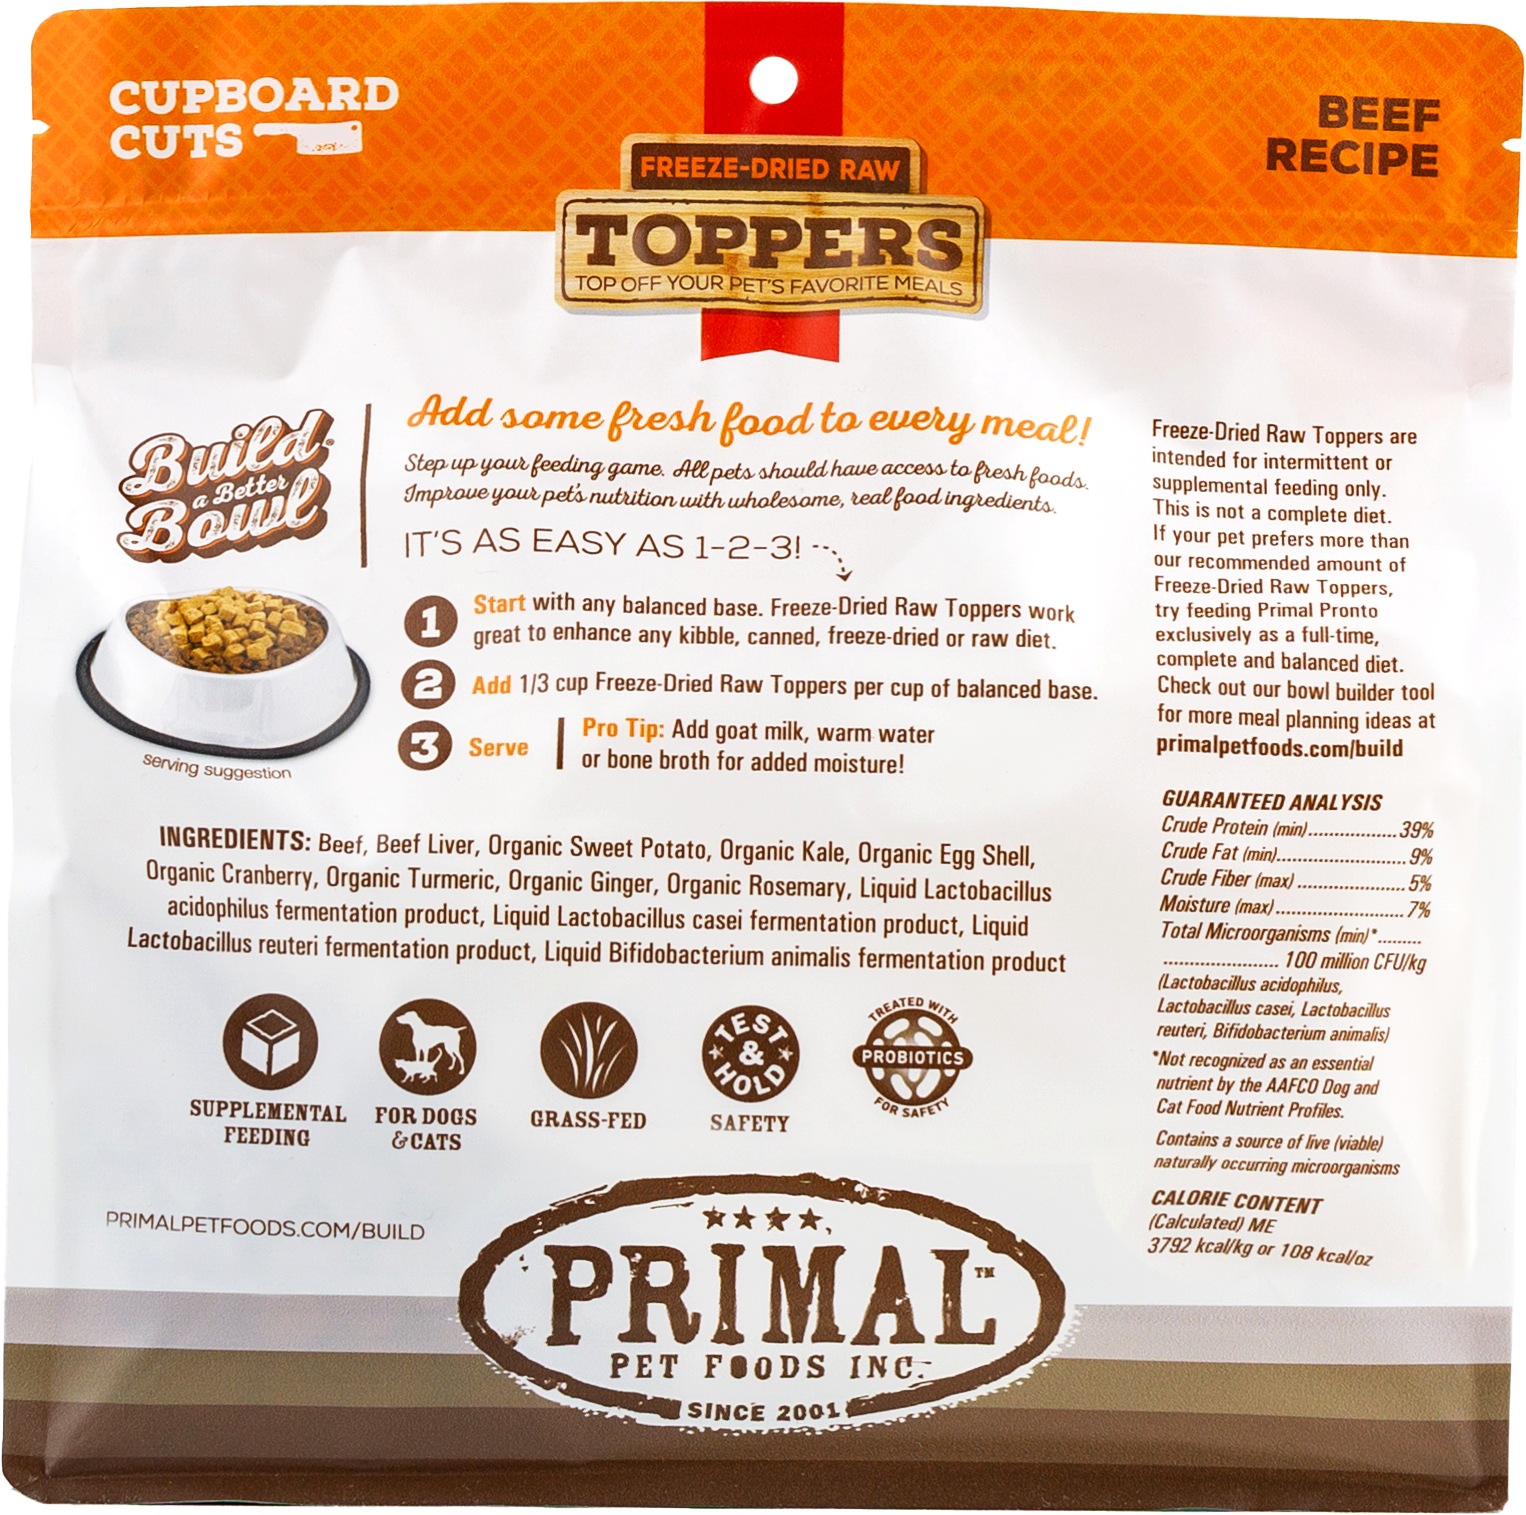 Primal Cupboard Cuts Freeze-Dried Raw Toppers - Beef, 18 oz